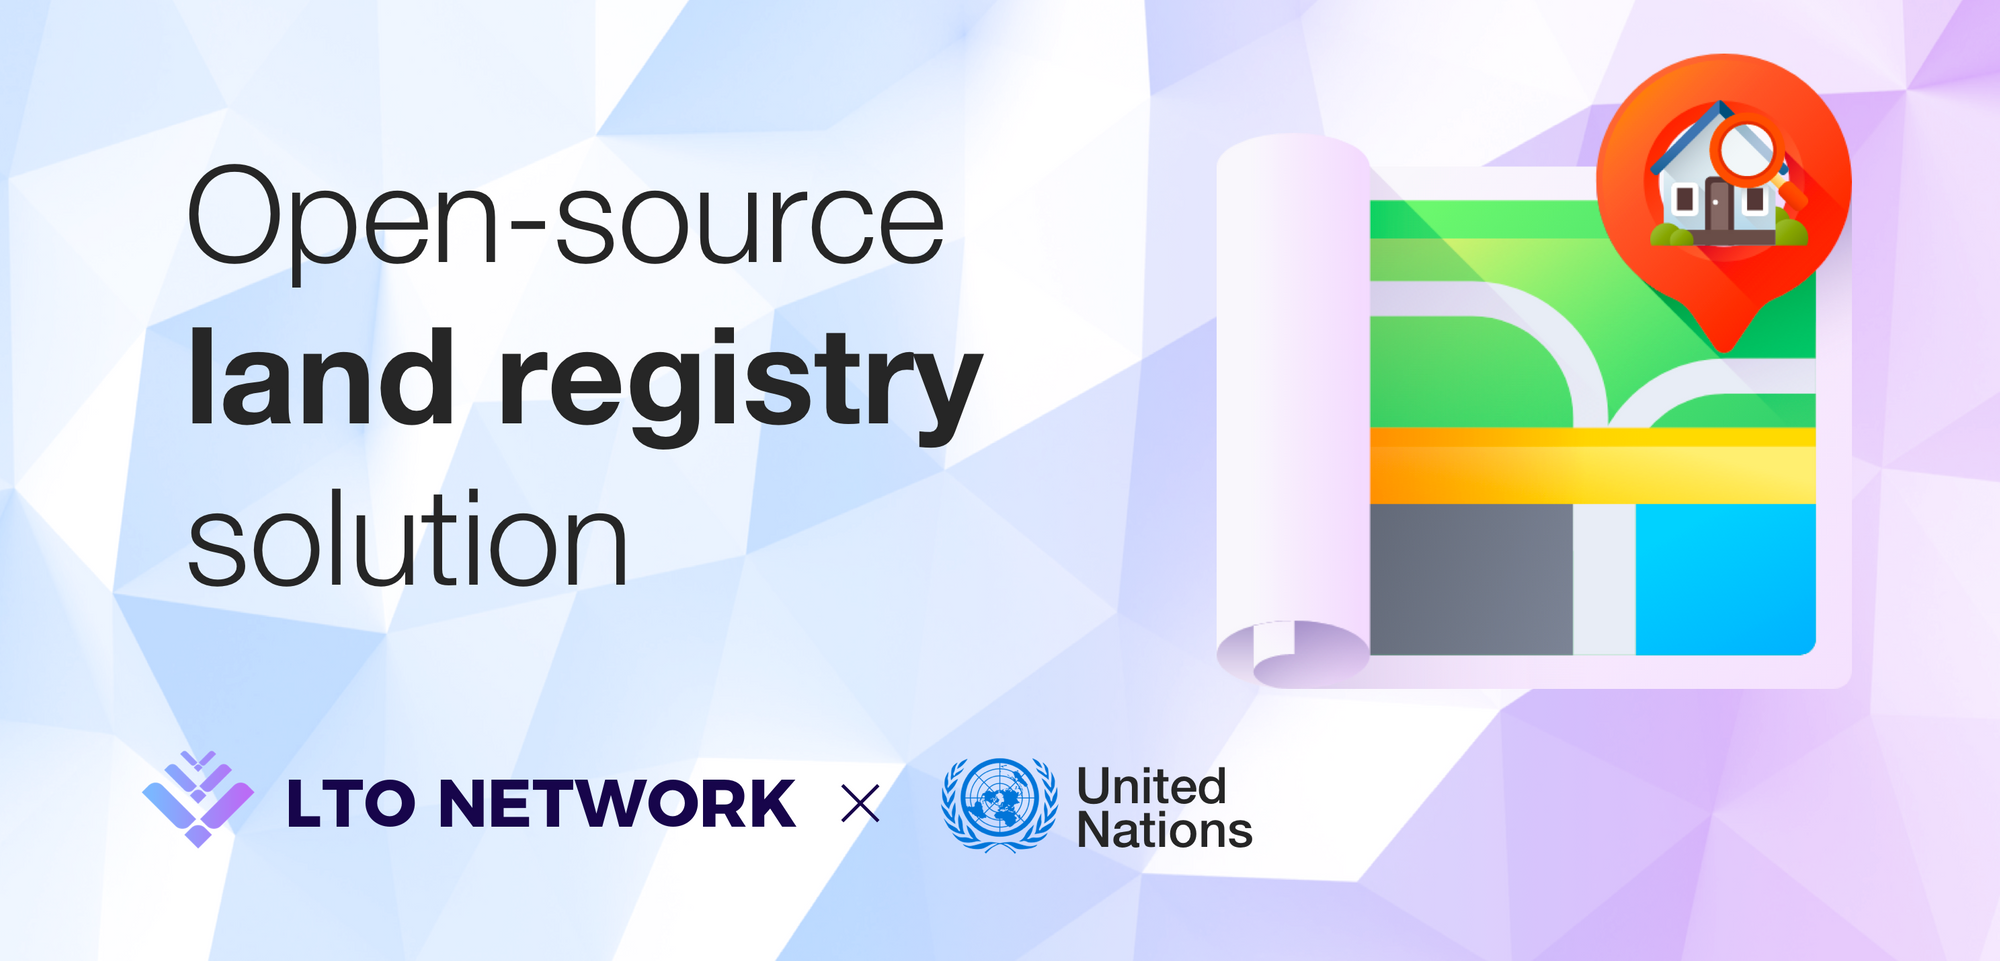 United Nations and LTO Network release world’s first open ...